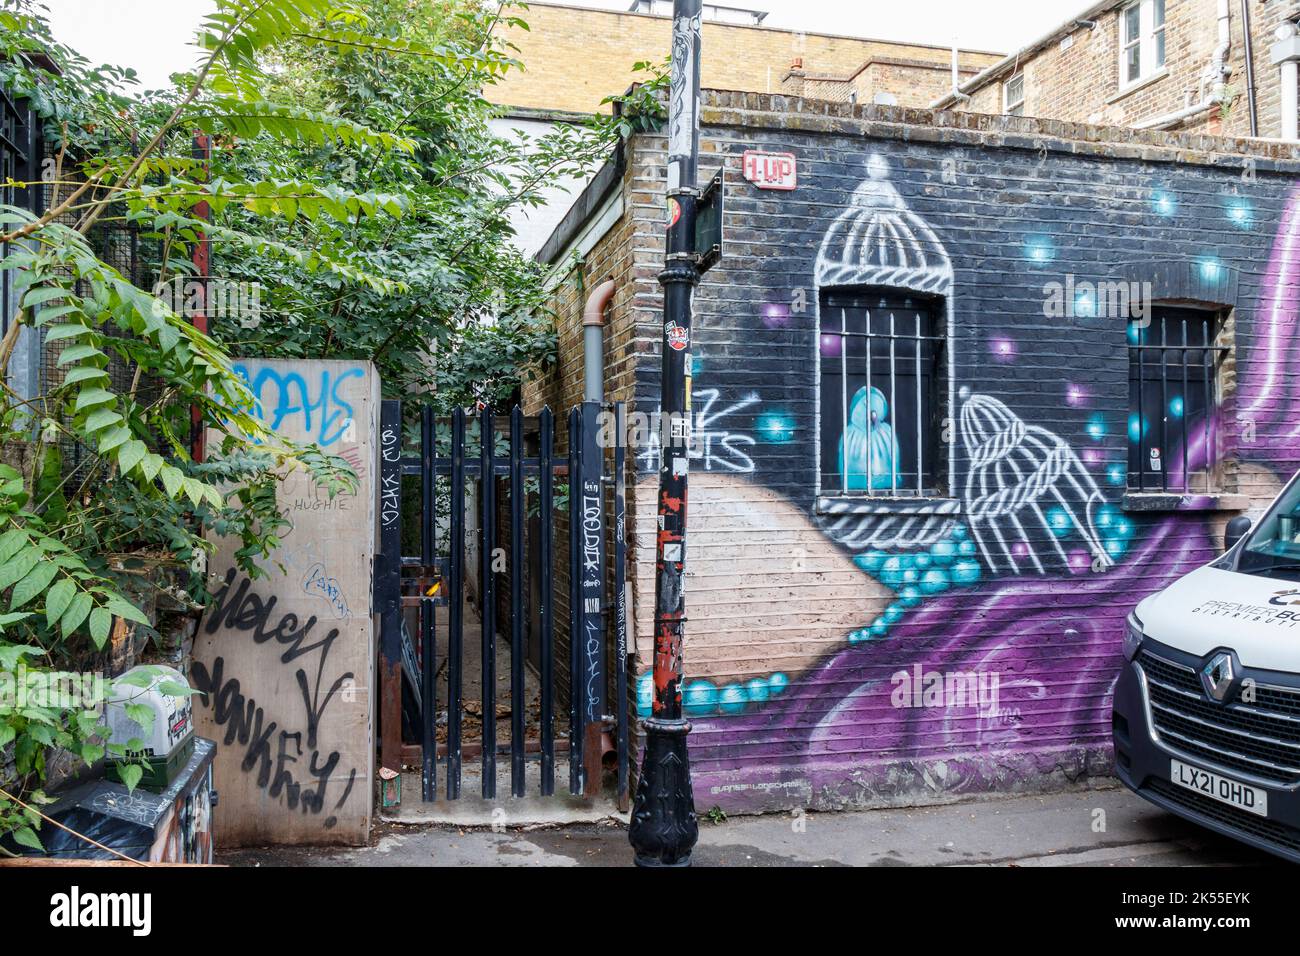 A spray-paint decorated wall in a back alley in Camden Town, London, UK Stock Photo